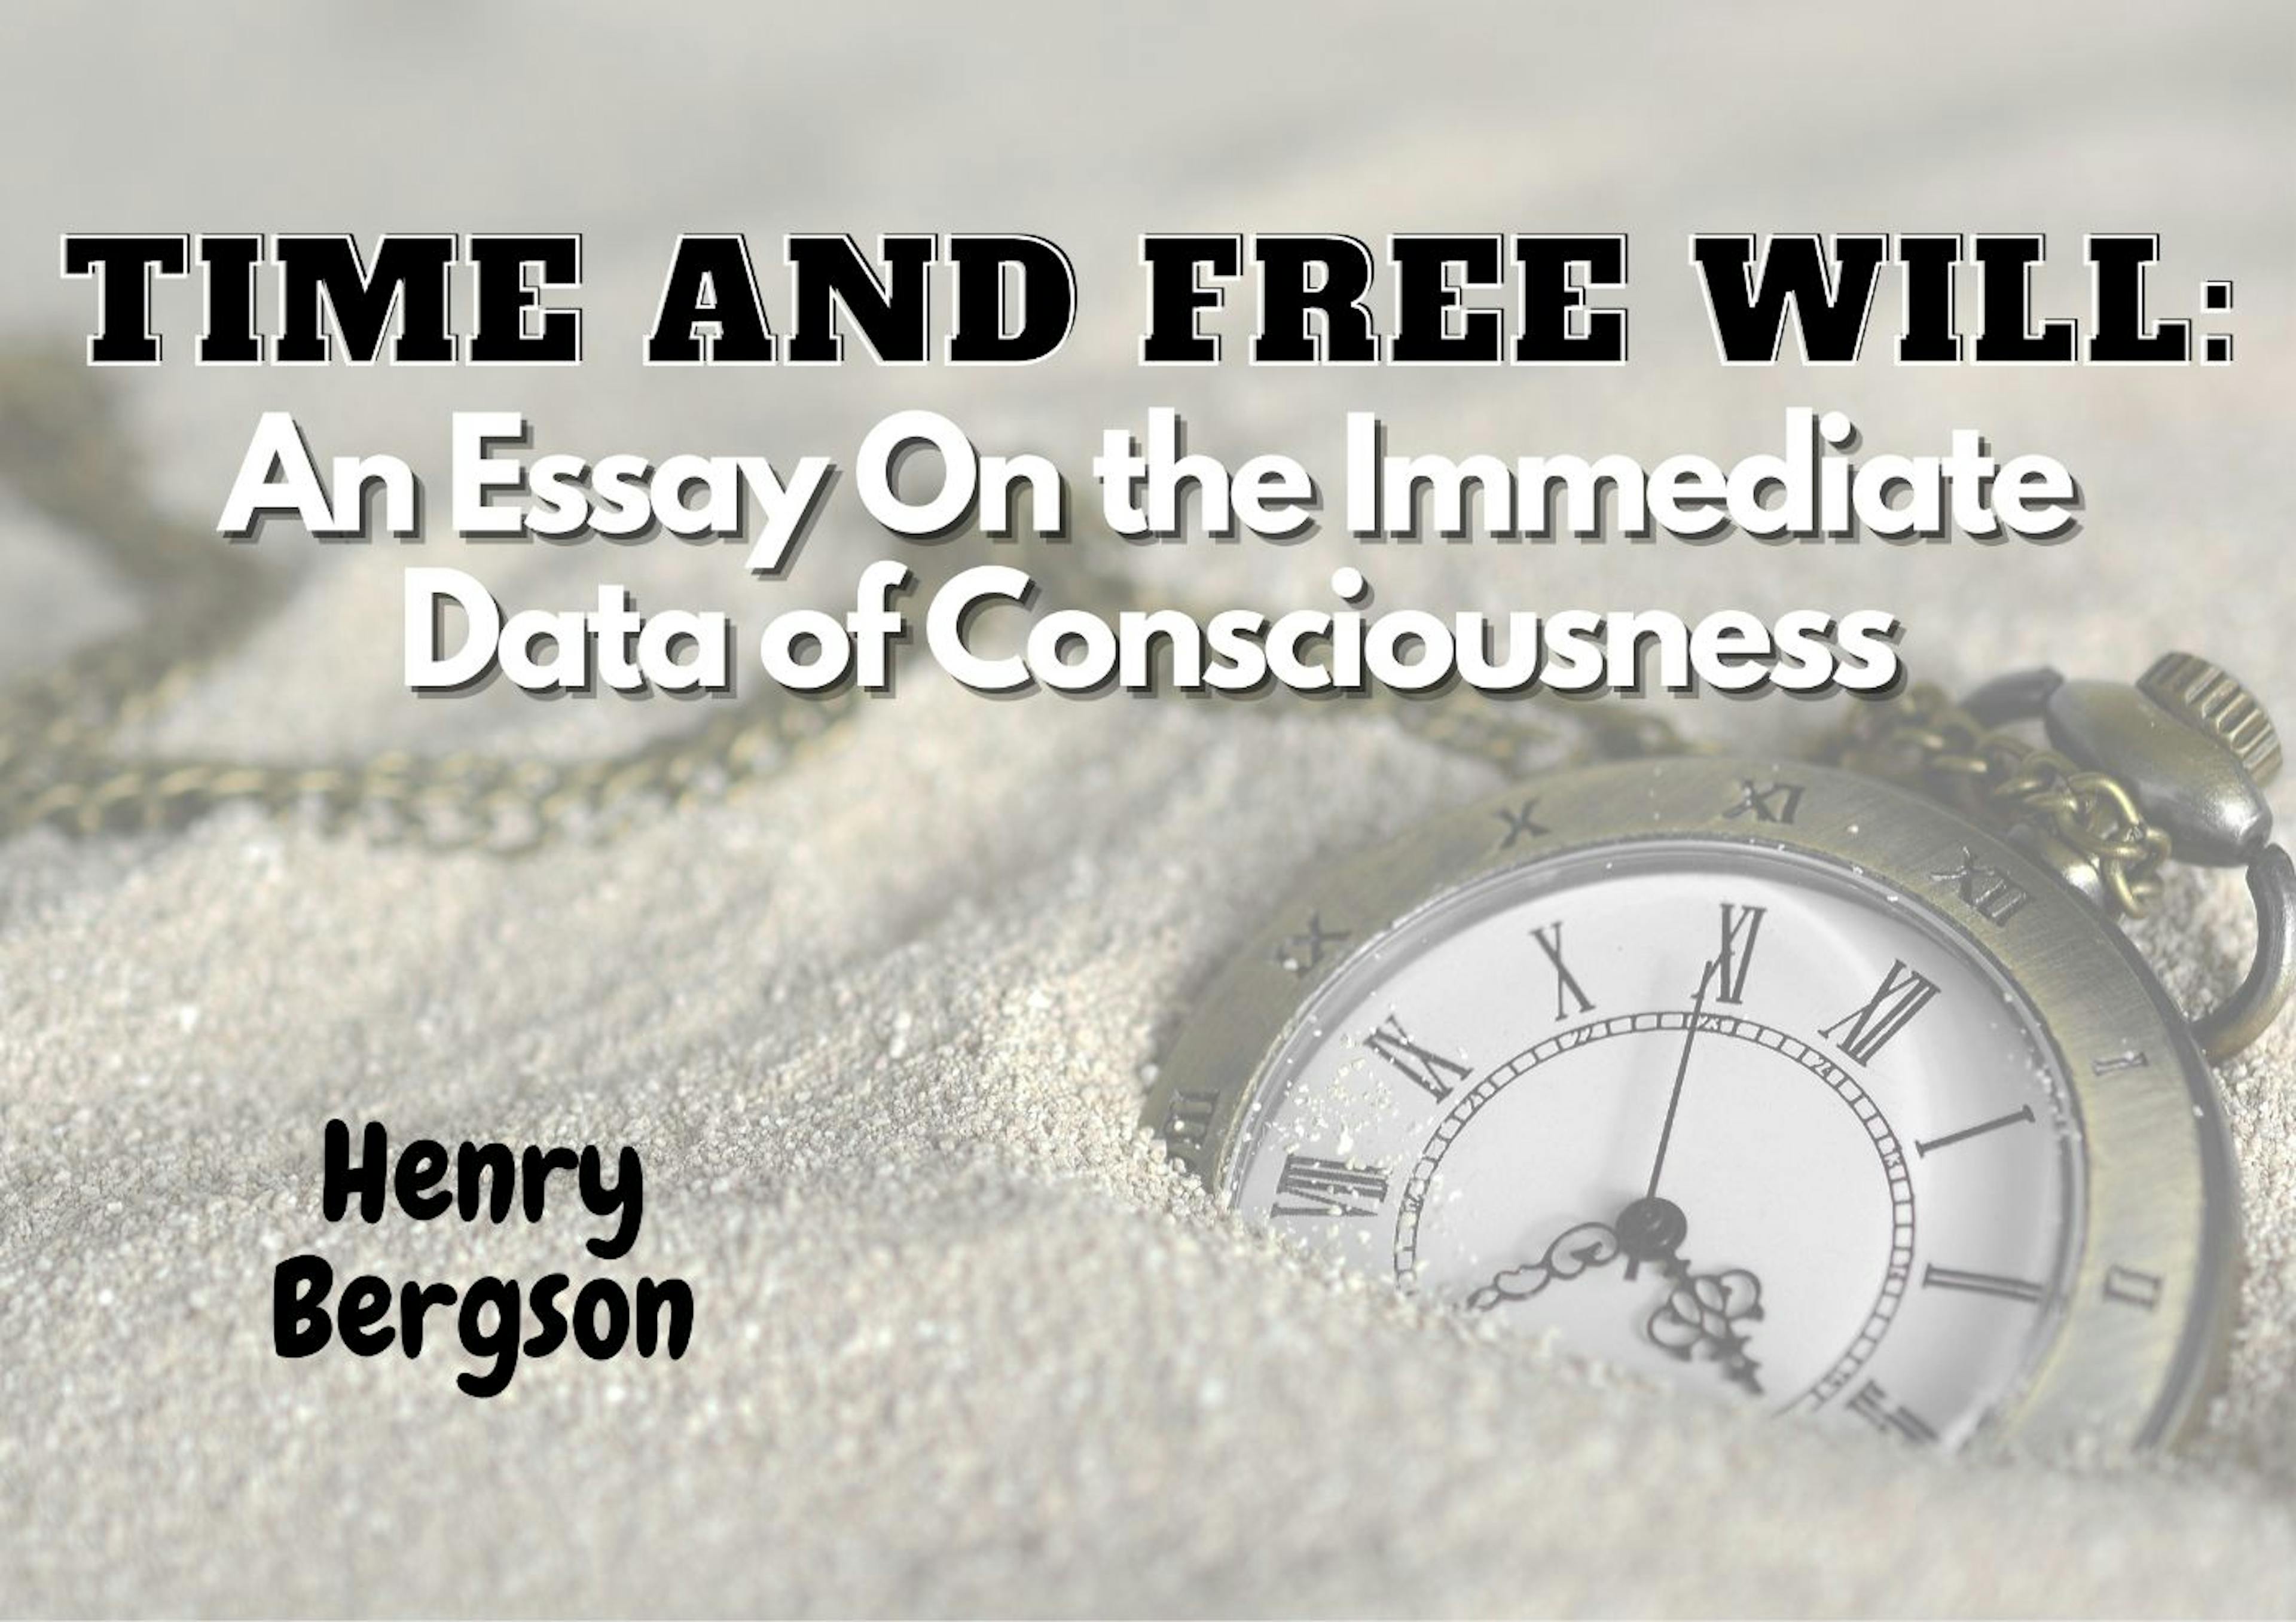 featured image - Time and Free Will: An Essay on the Immediate Data of Consciousness -  Table of Links